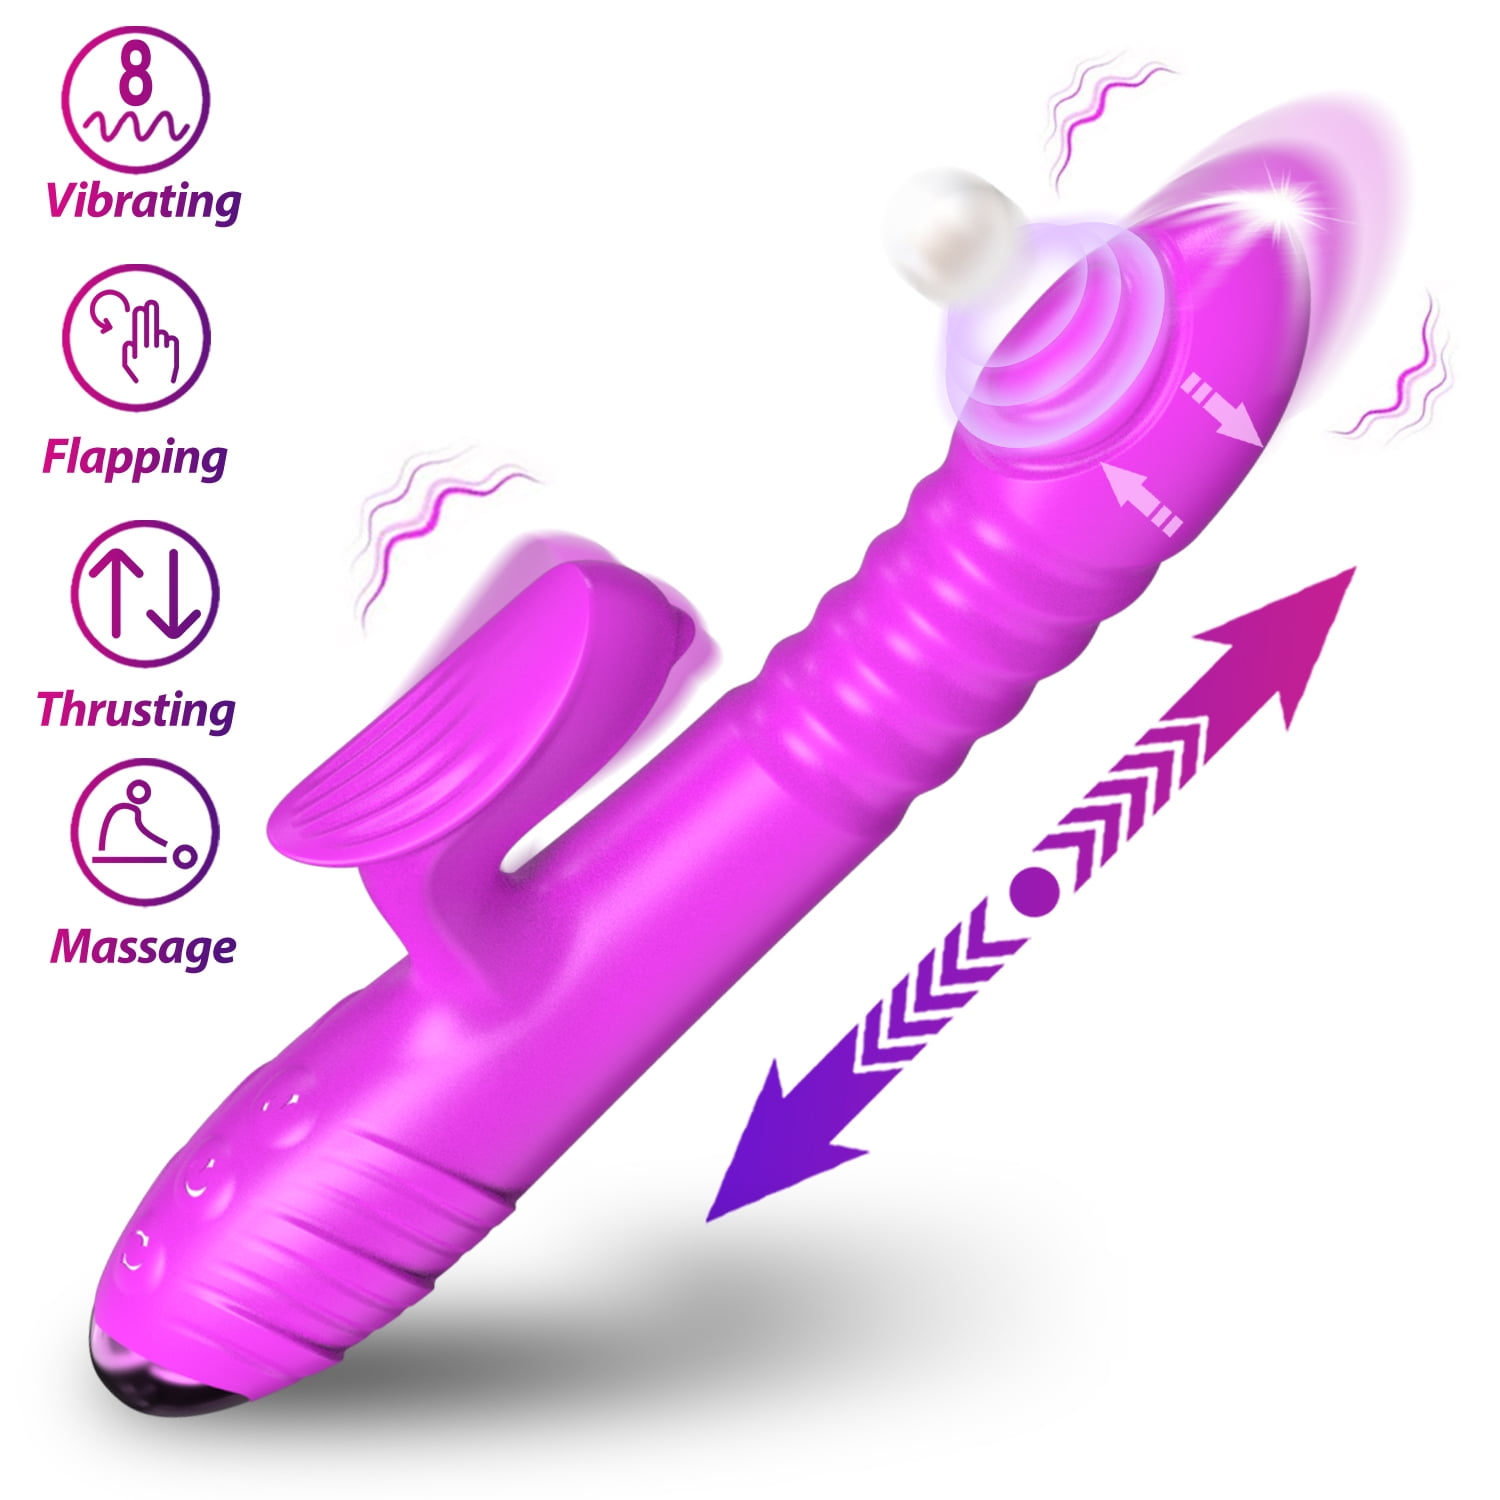 ESVOW Thrusting Rabbit Vibrator Sex Toys for Women, Clitoral G Spot Stimulator with 8 Powerful Vibration and Thumping Modes and Telescopic Function,3 IN 1 Waterproof Adult Toy for Couples Pleasure photo